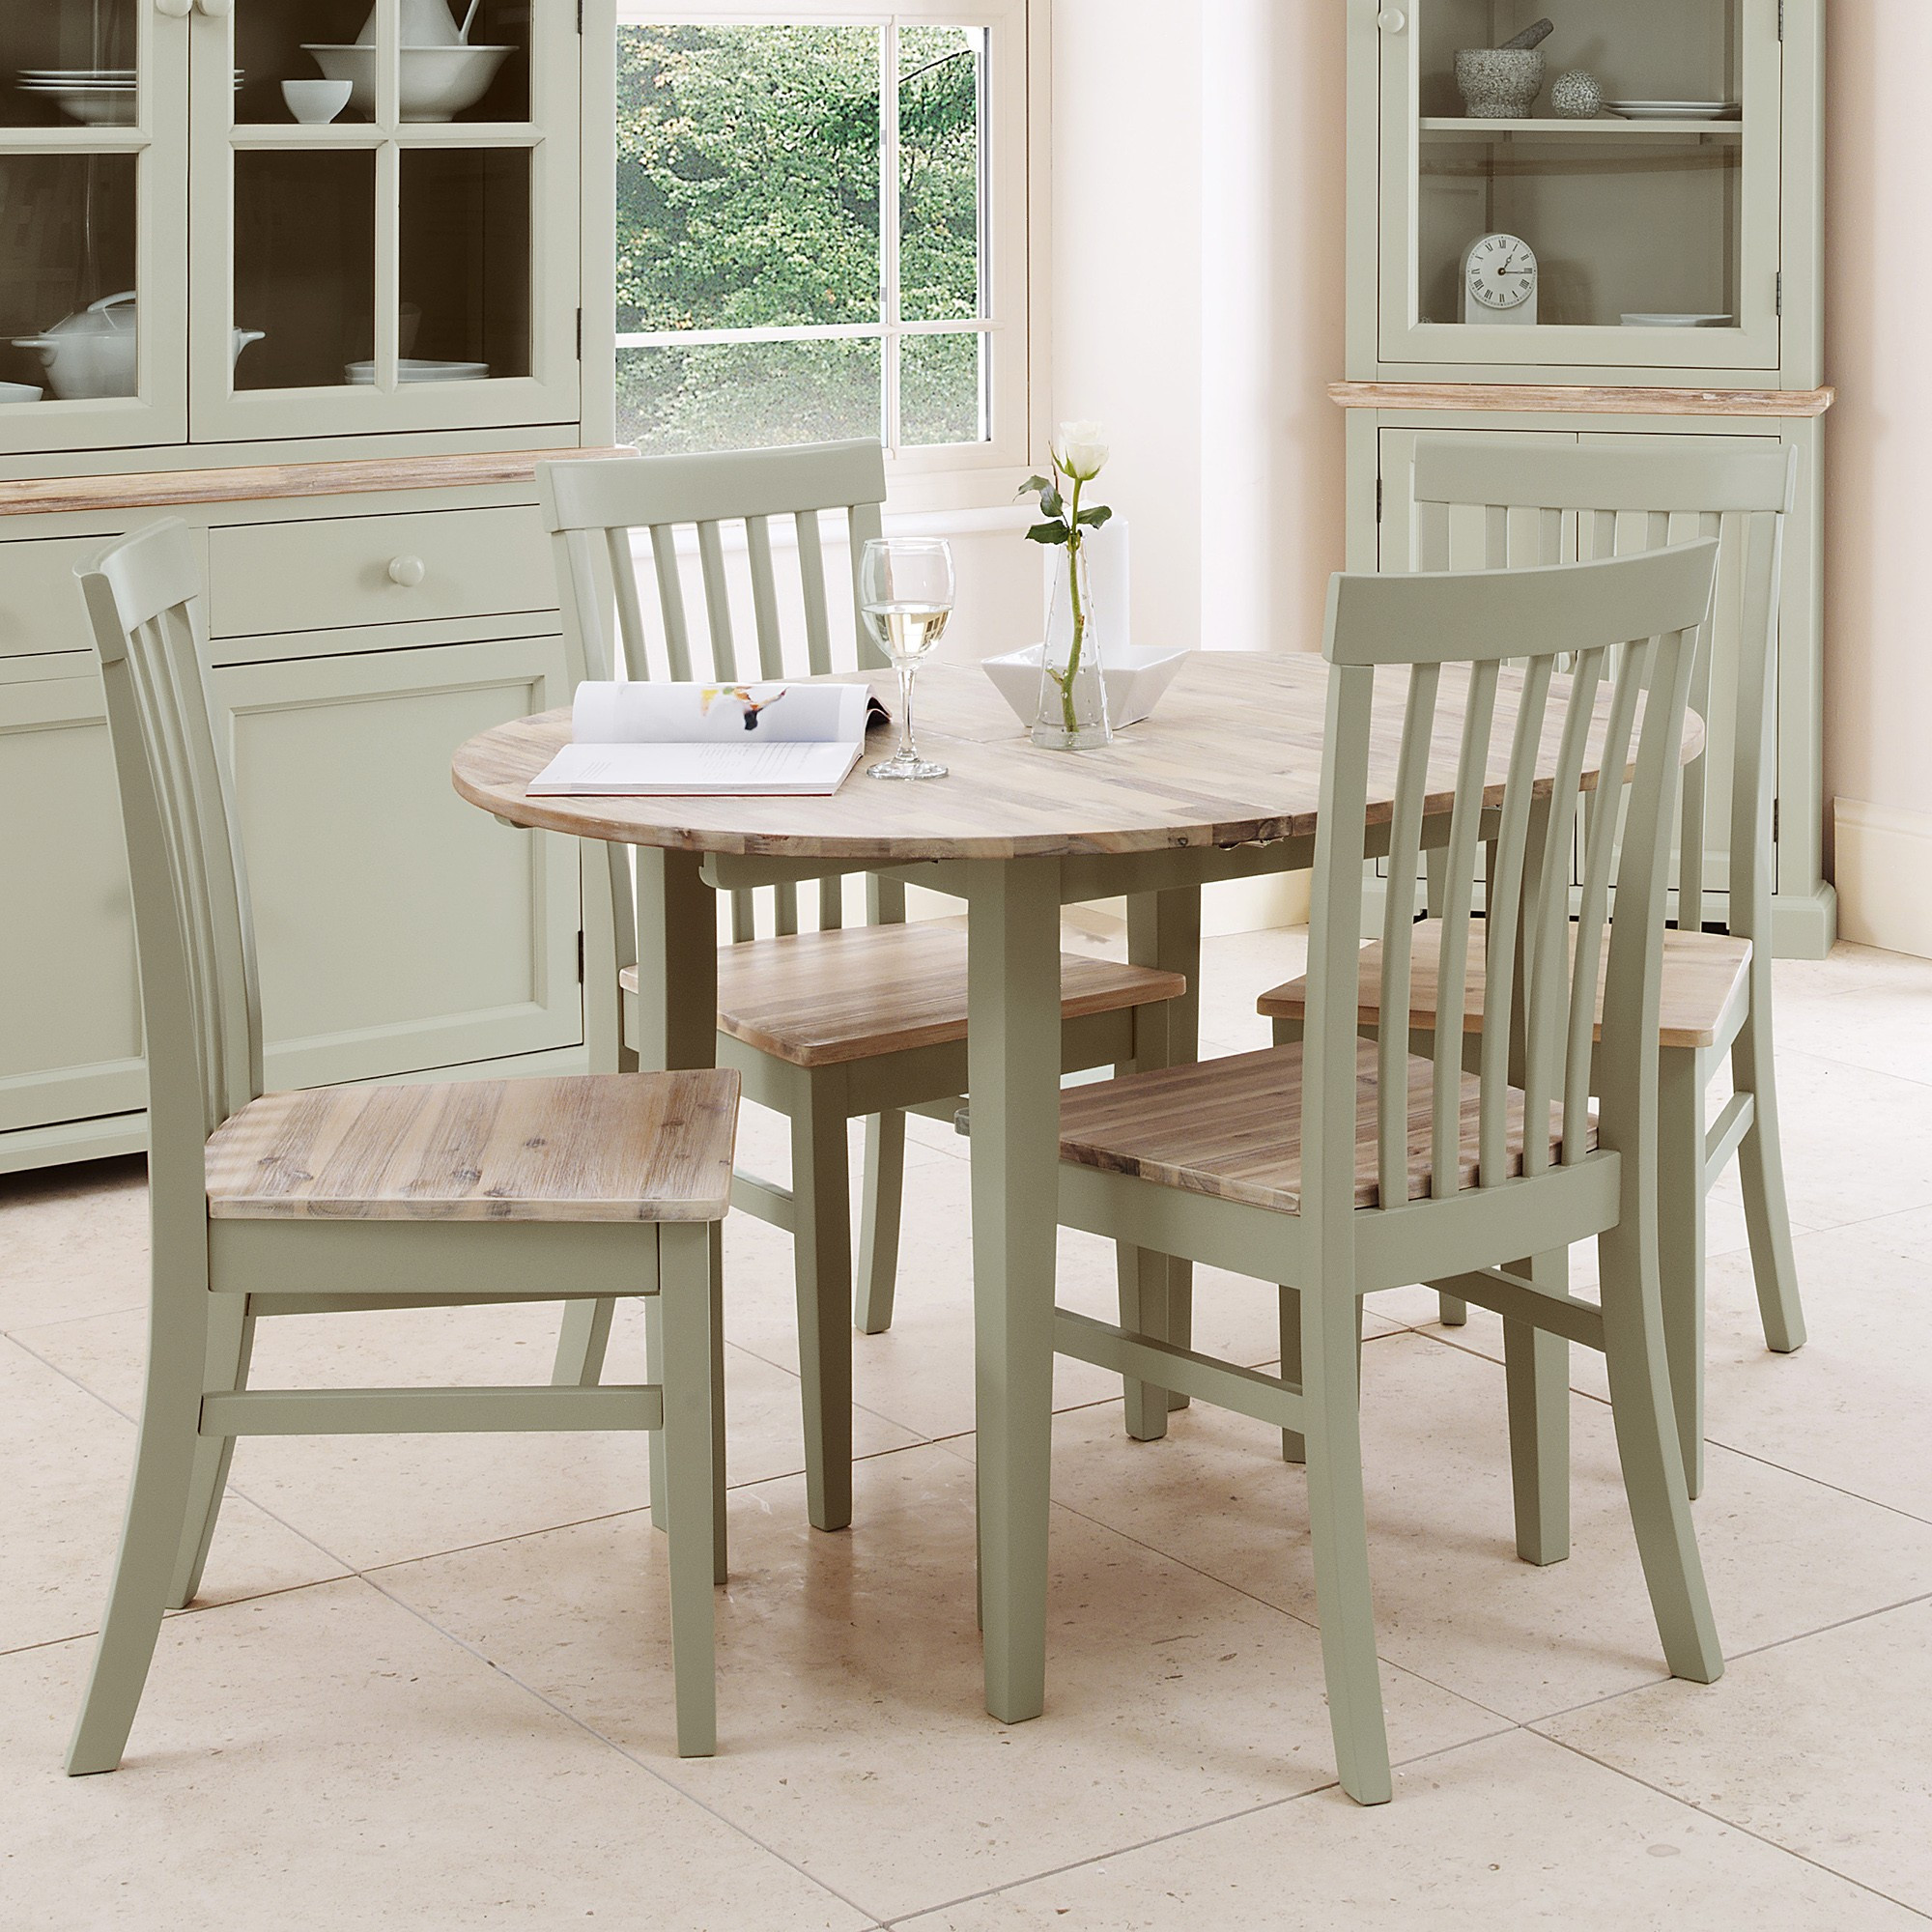 Small Round Kitchen Table Sets
 Florence round extended table 92 117cm sage green